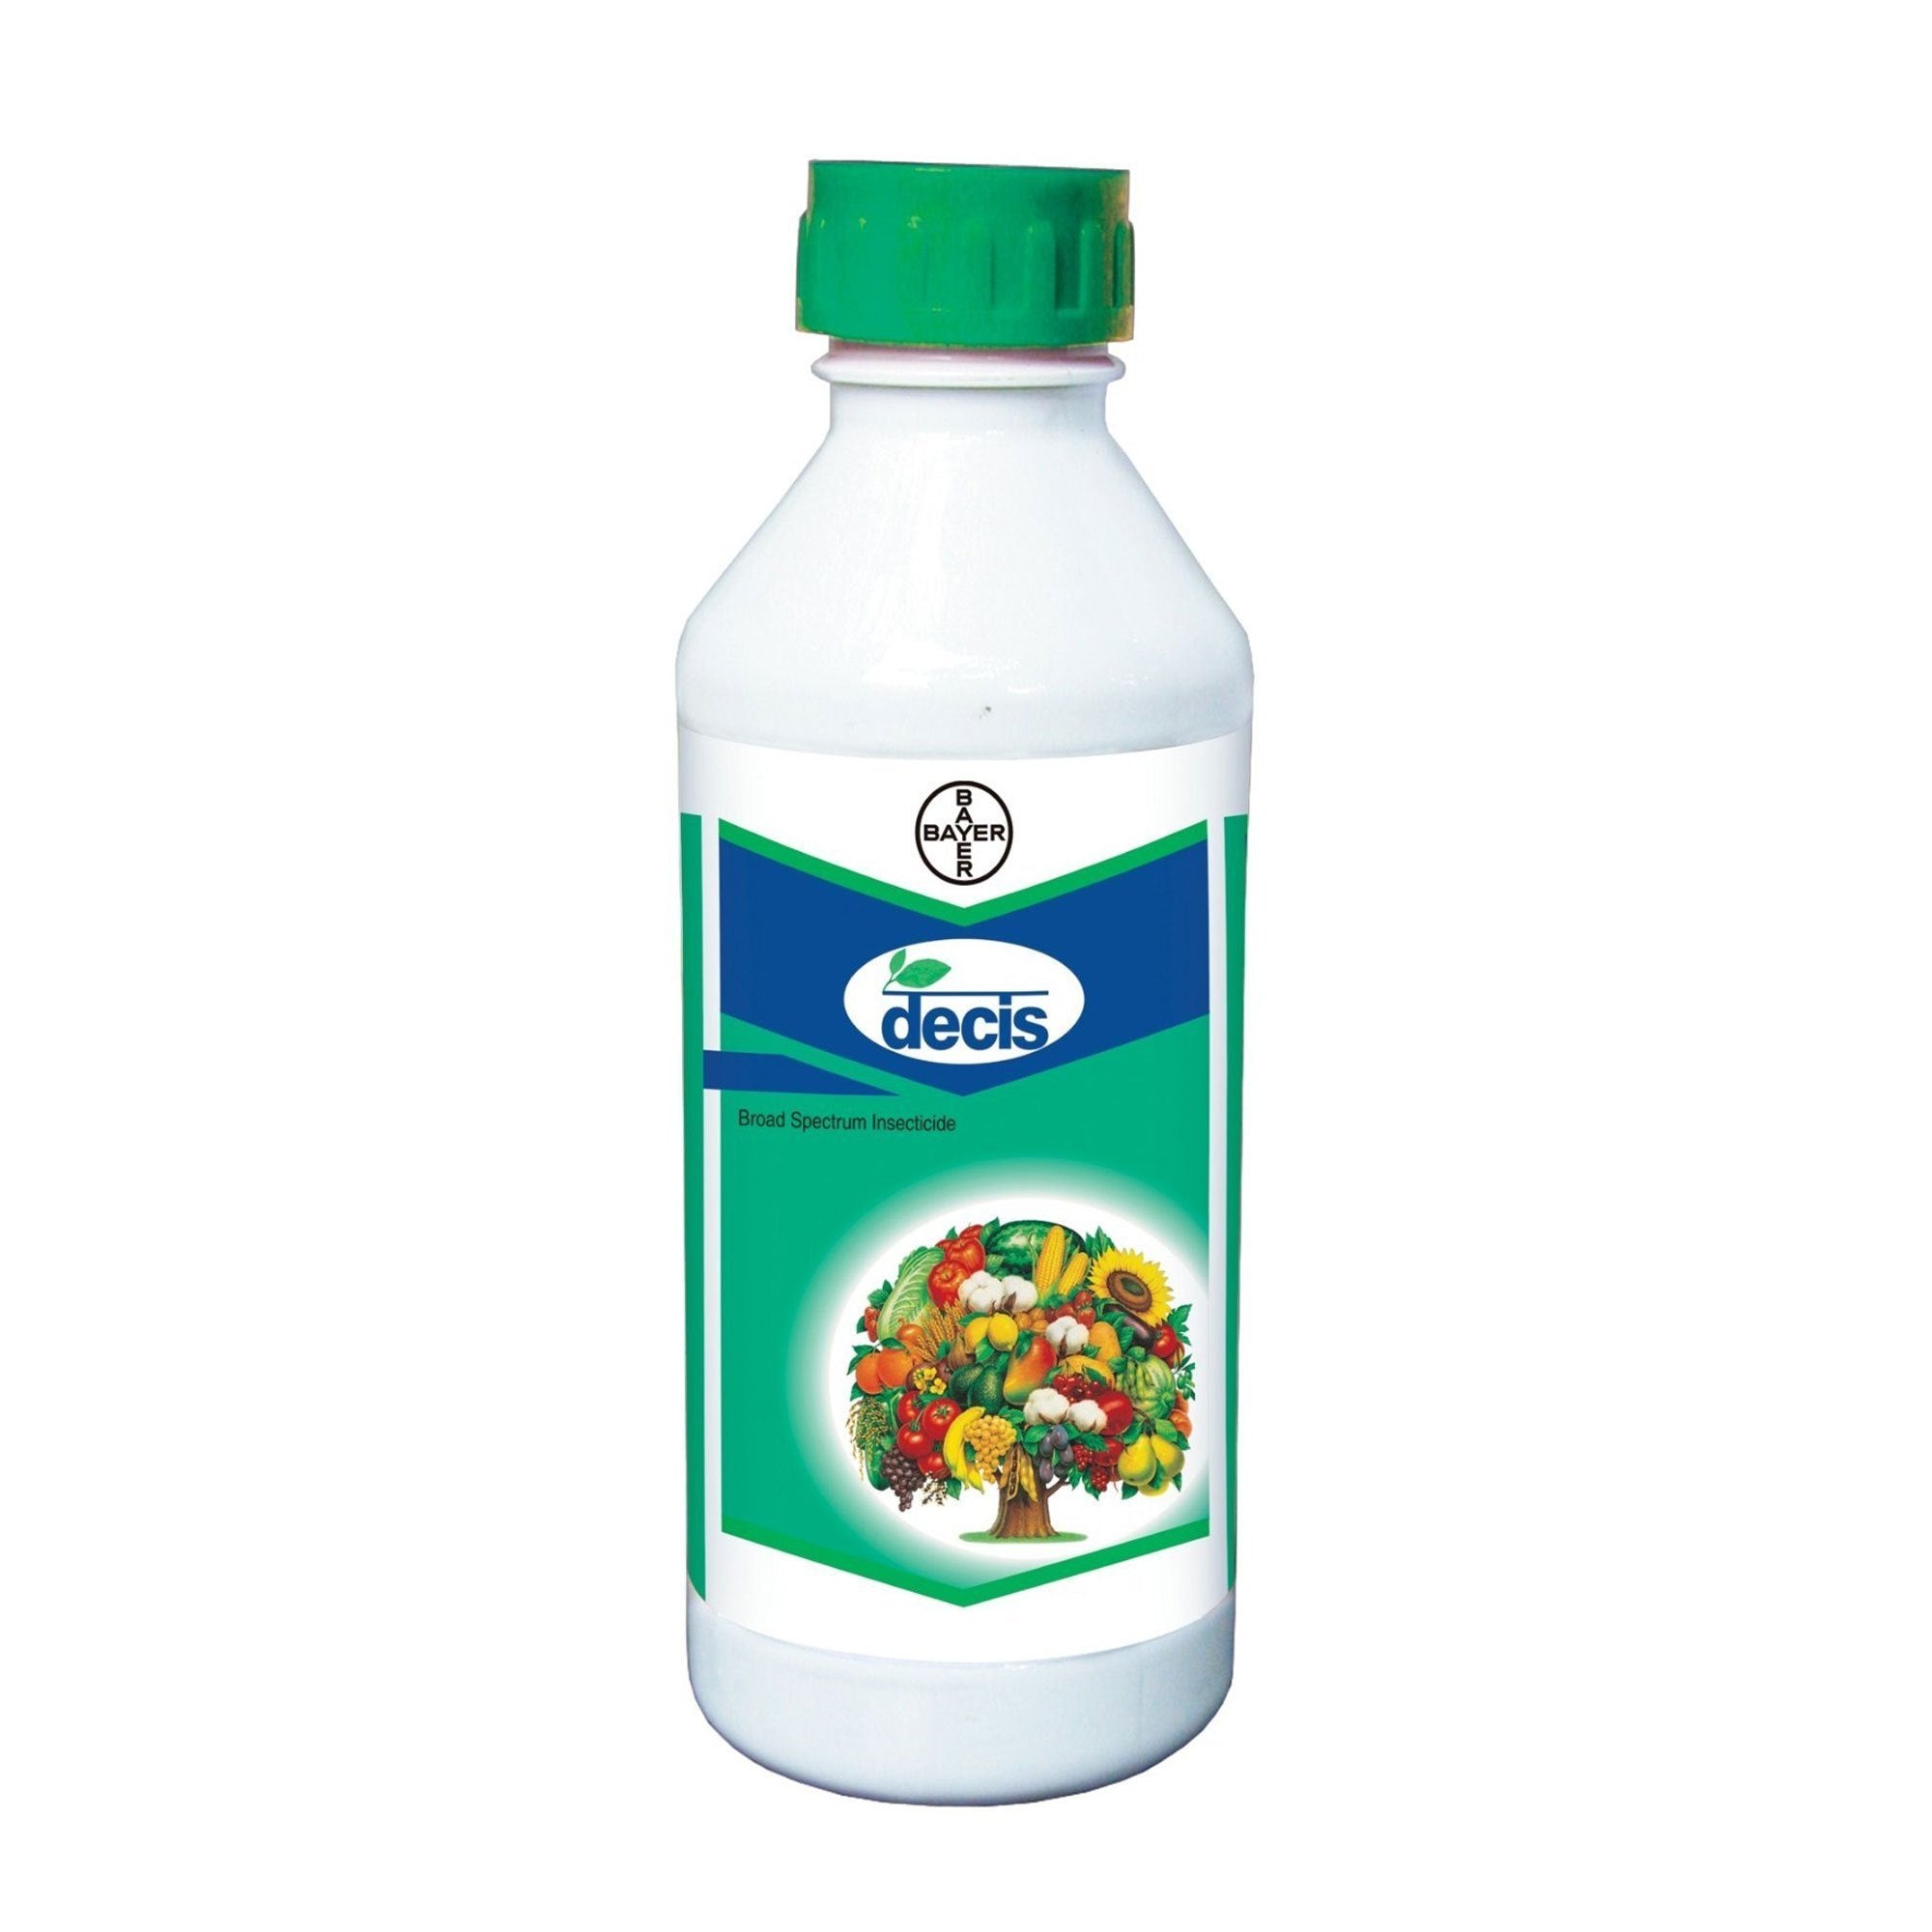 Decis 2.8 EC Insecticide product  Image